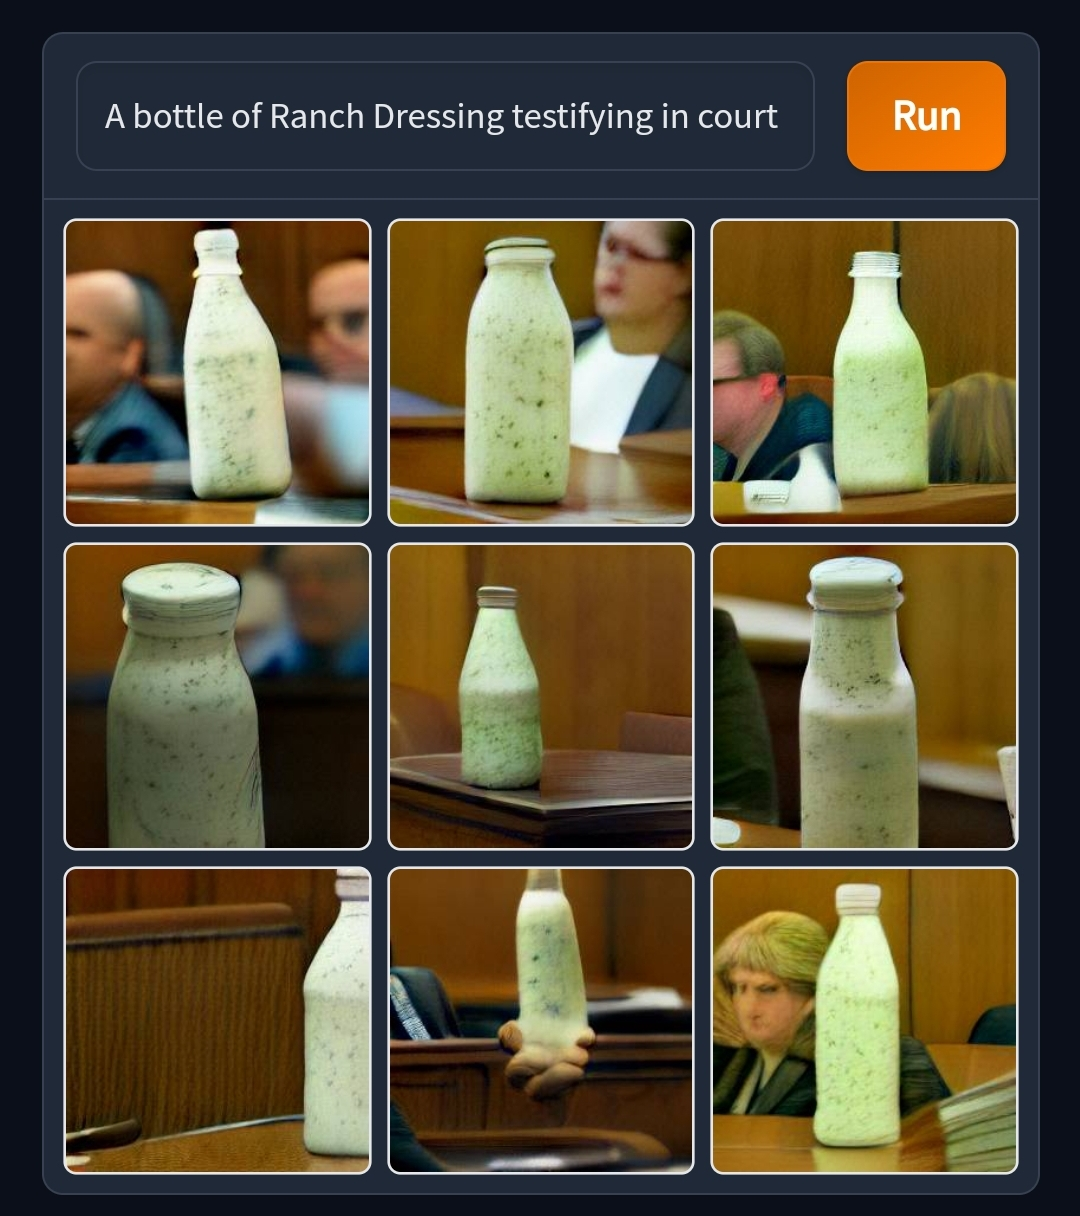 dalle_ranch_dressing_testifying.png